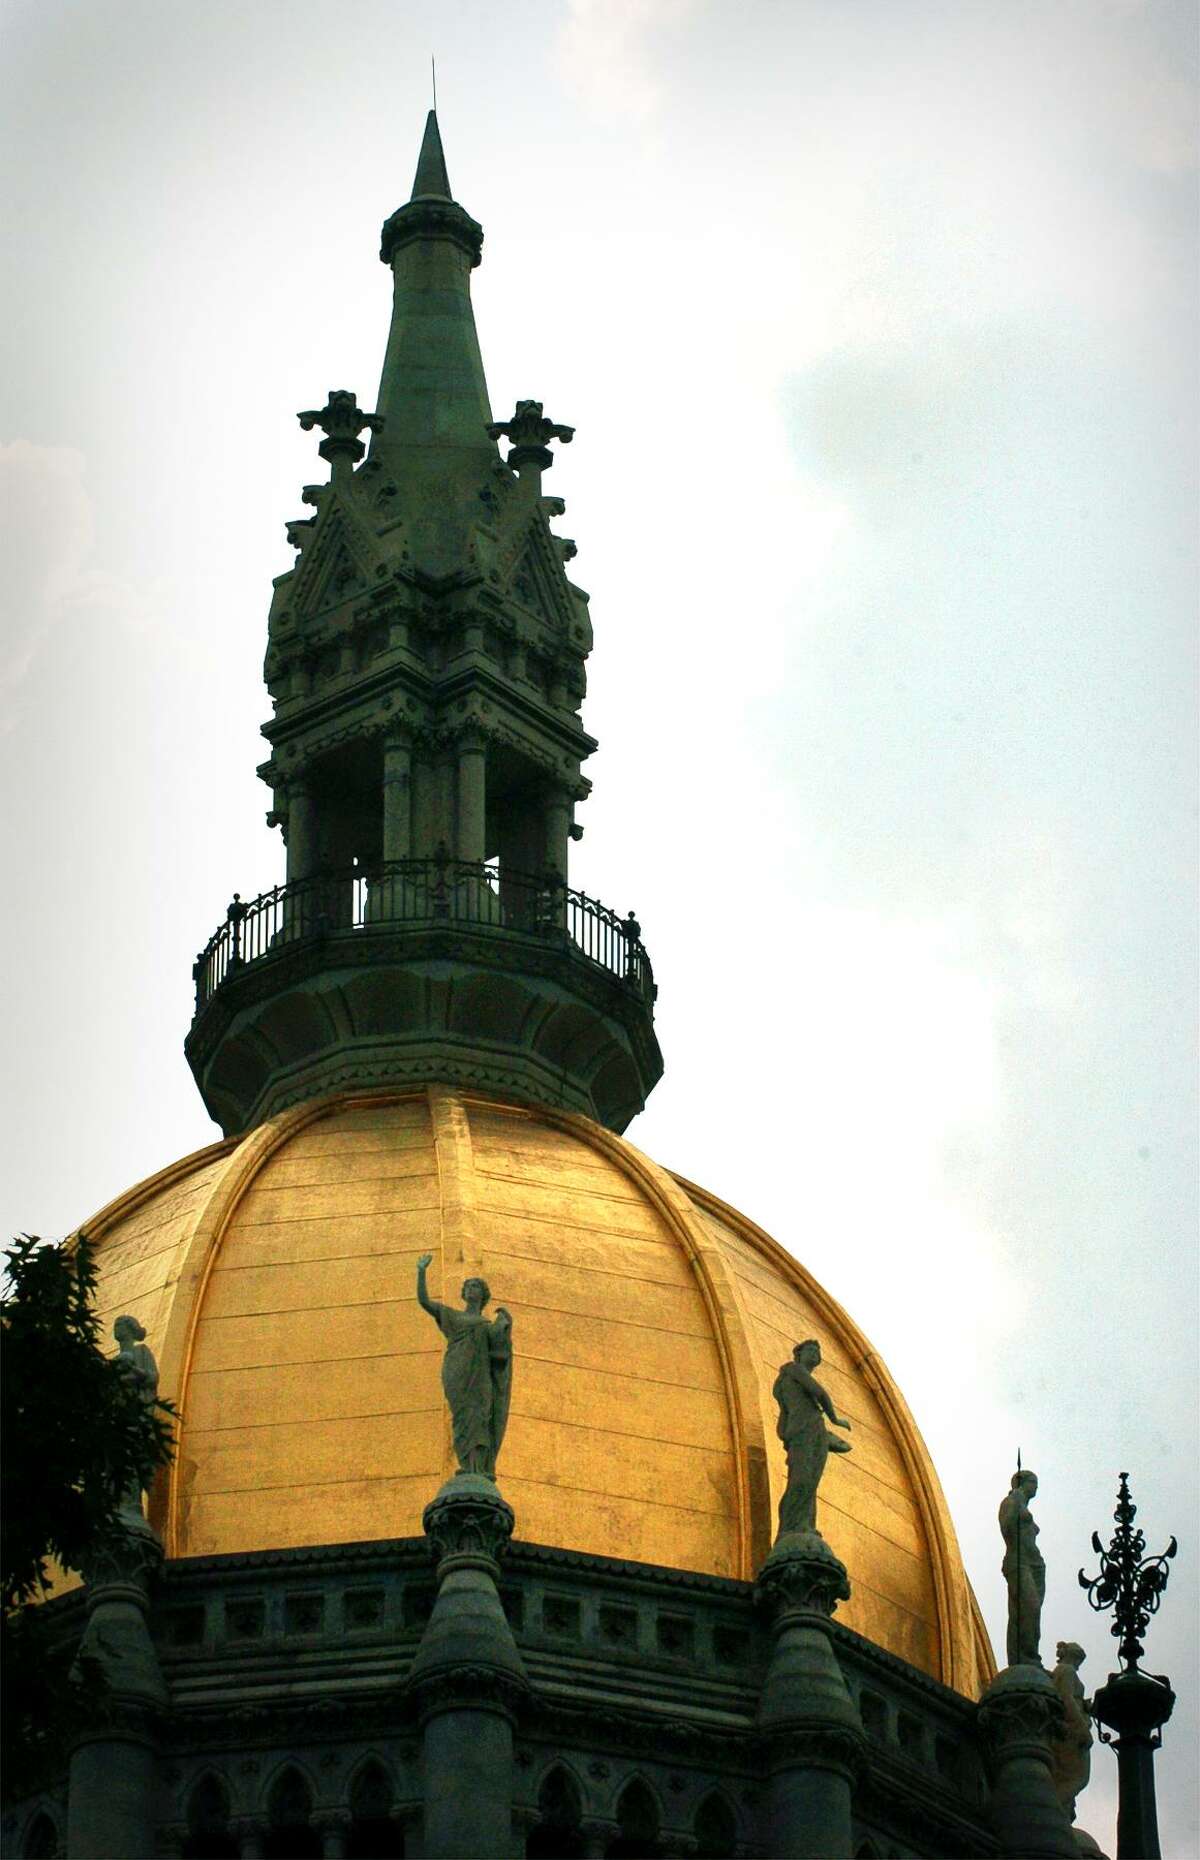 Can you name any of the nine muses, the statutes of goddess figures the daughters of Zeus and Mnemosyne, around the base of the Connecticut State Capitol dome? Then you could be a winner of the Hearst CT Media trivia contest on Thursday, September 6, in the Hall Full Brewery in Stamford.